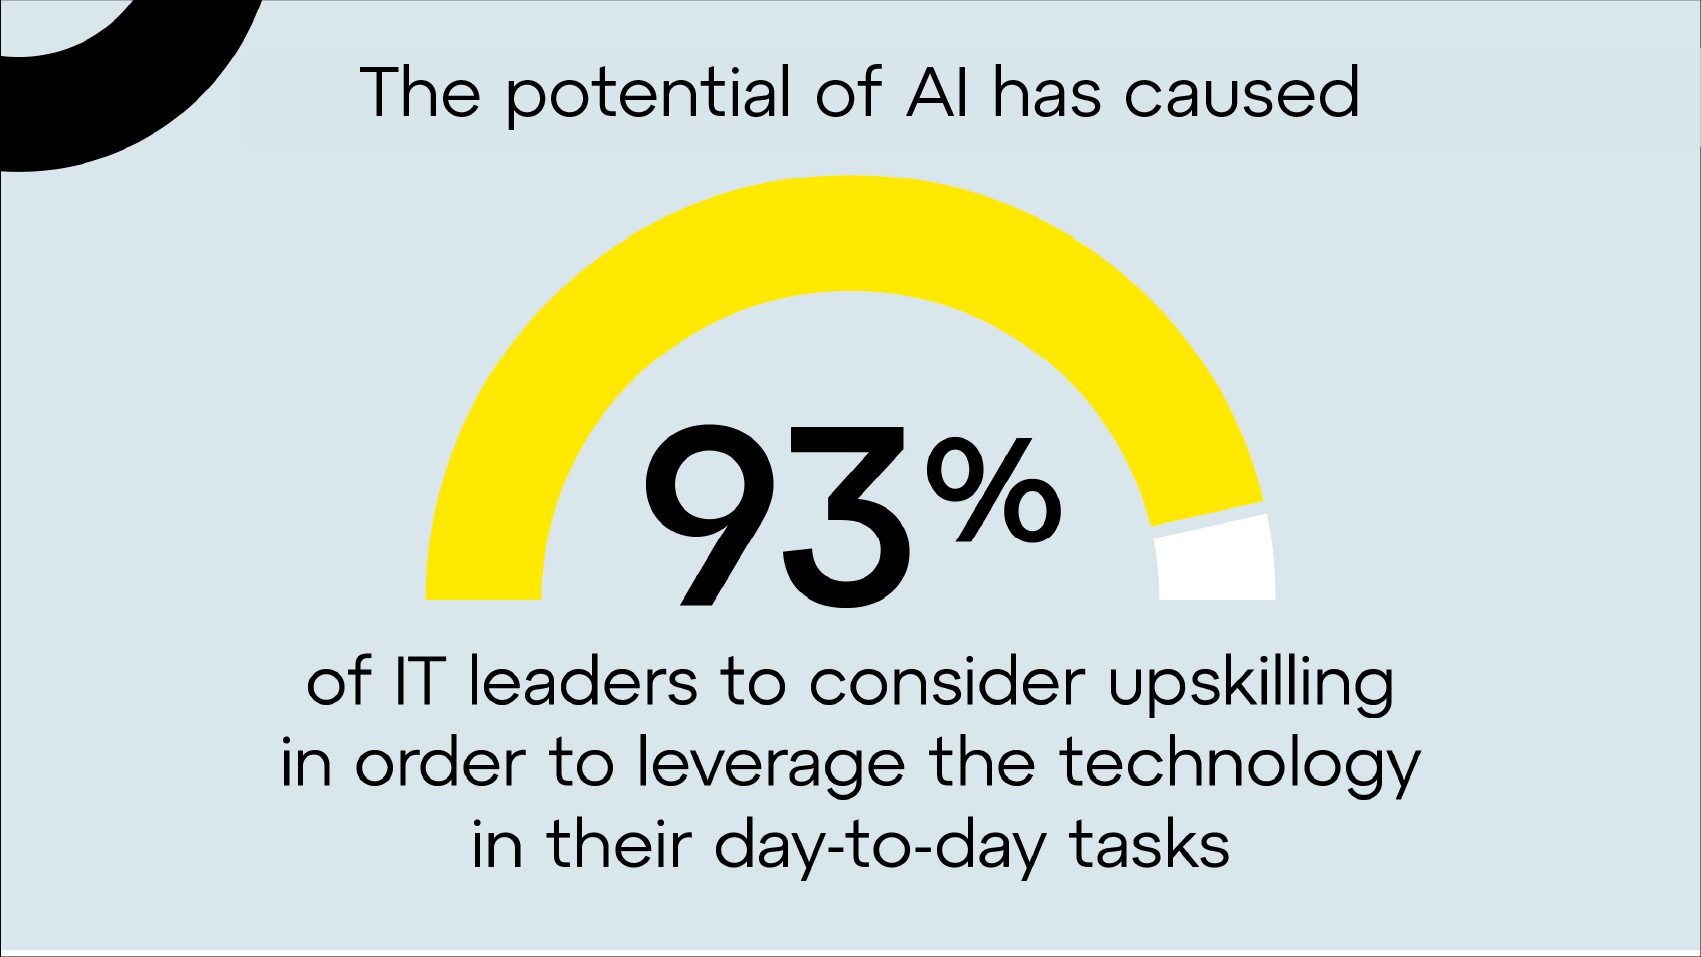 The potential of AI has caused 93% of IT leaders to consider upskilling in order to leverage the technology in their day-to-day tasks.